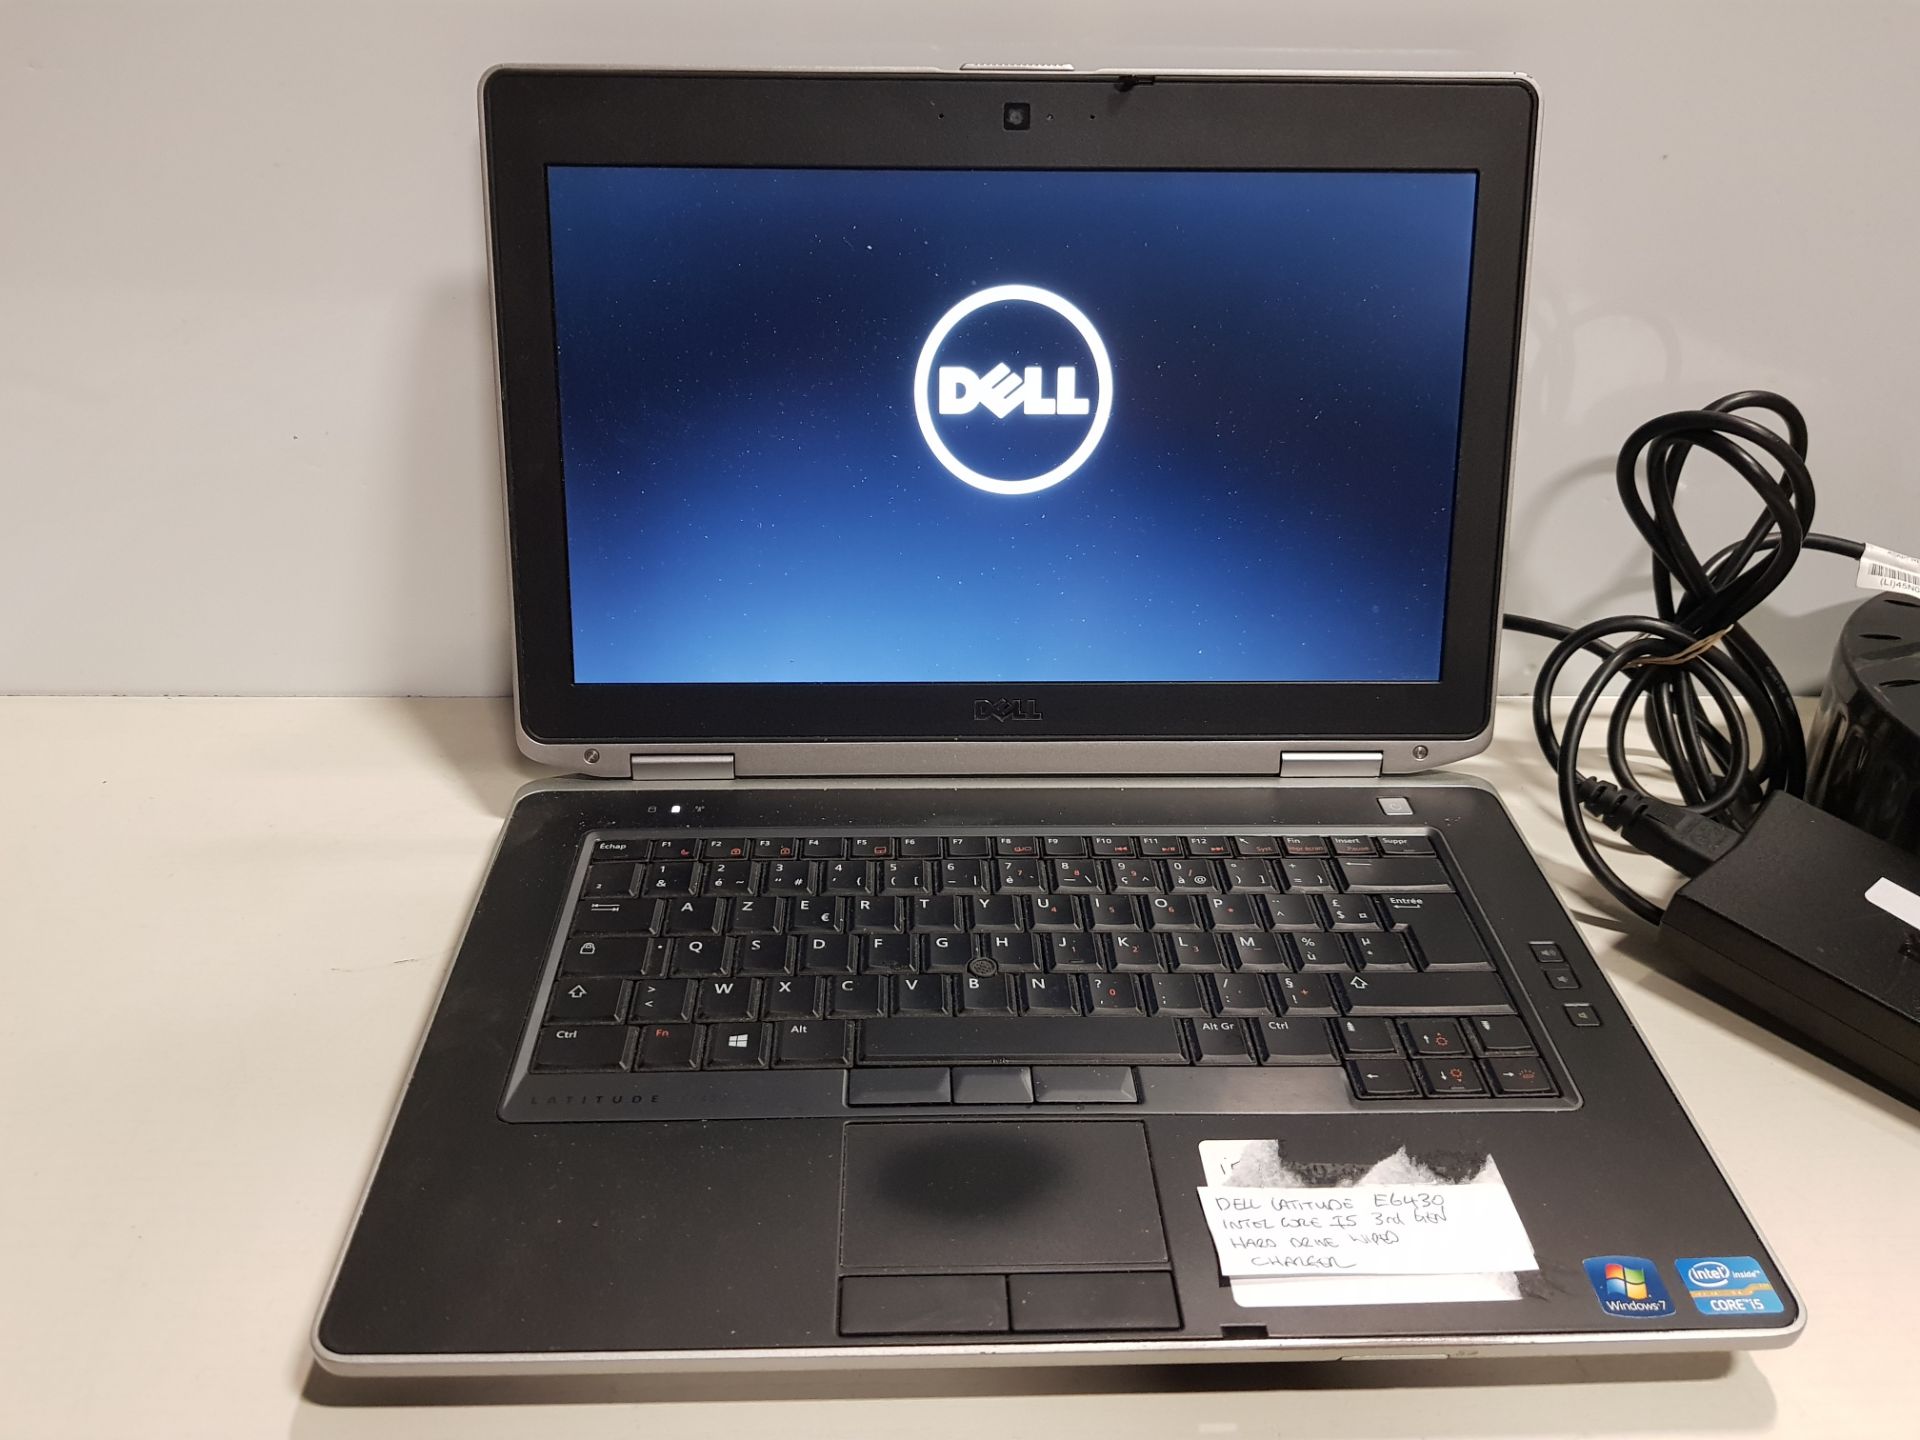 1 X DELL LATITUDE E6430 LAPTOP INTEL CORE I5 3RD GEN NO O/S WITH CHARGER